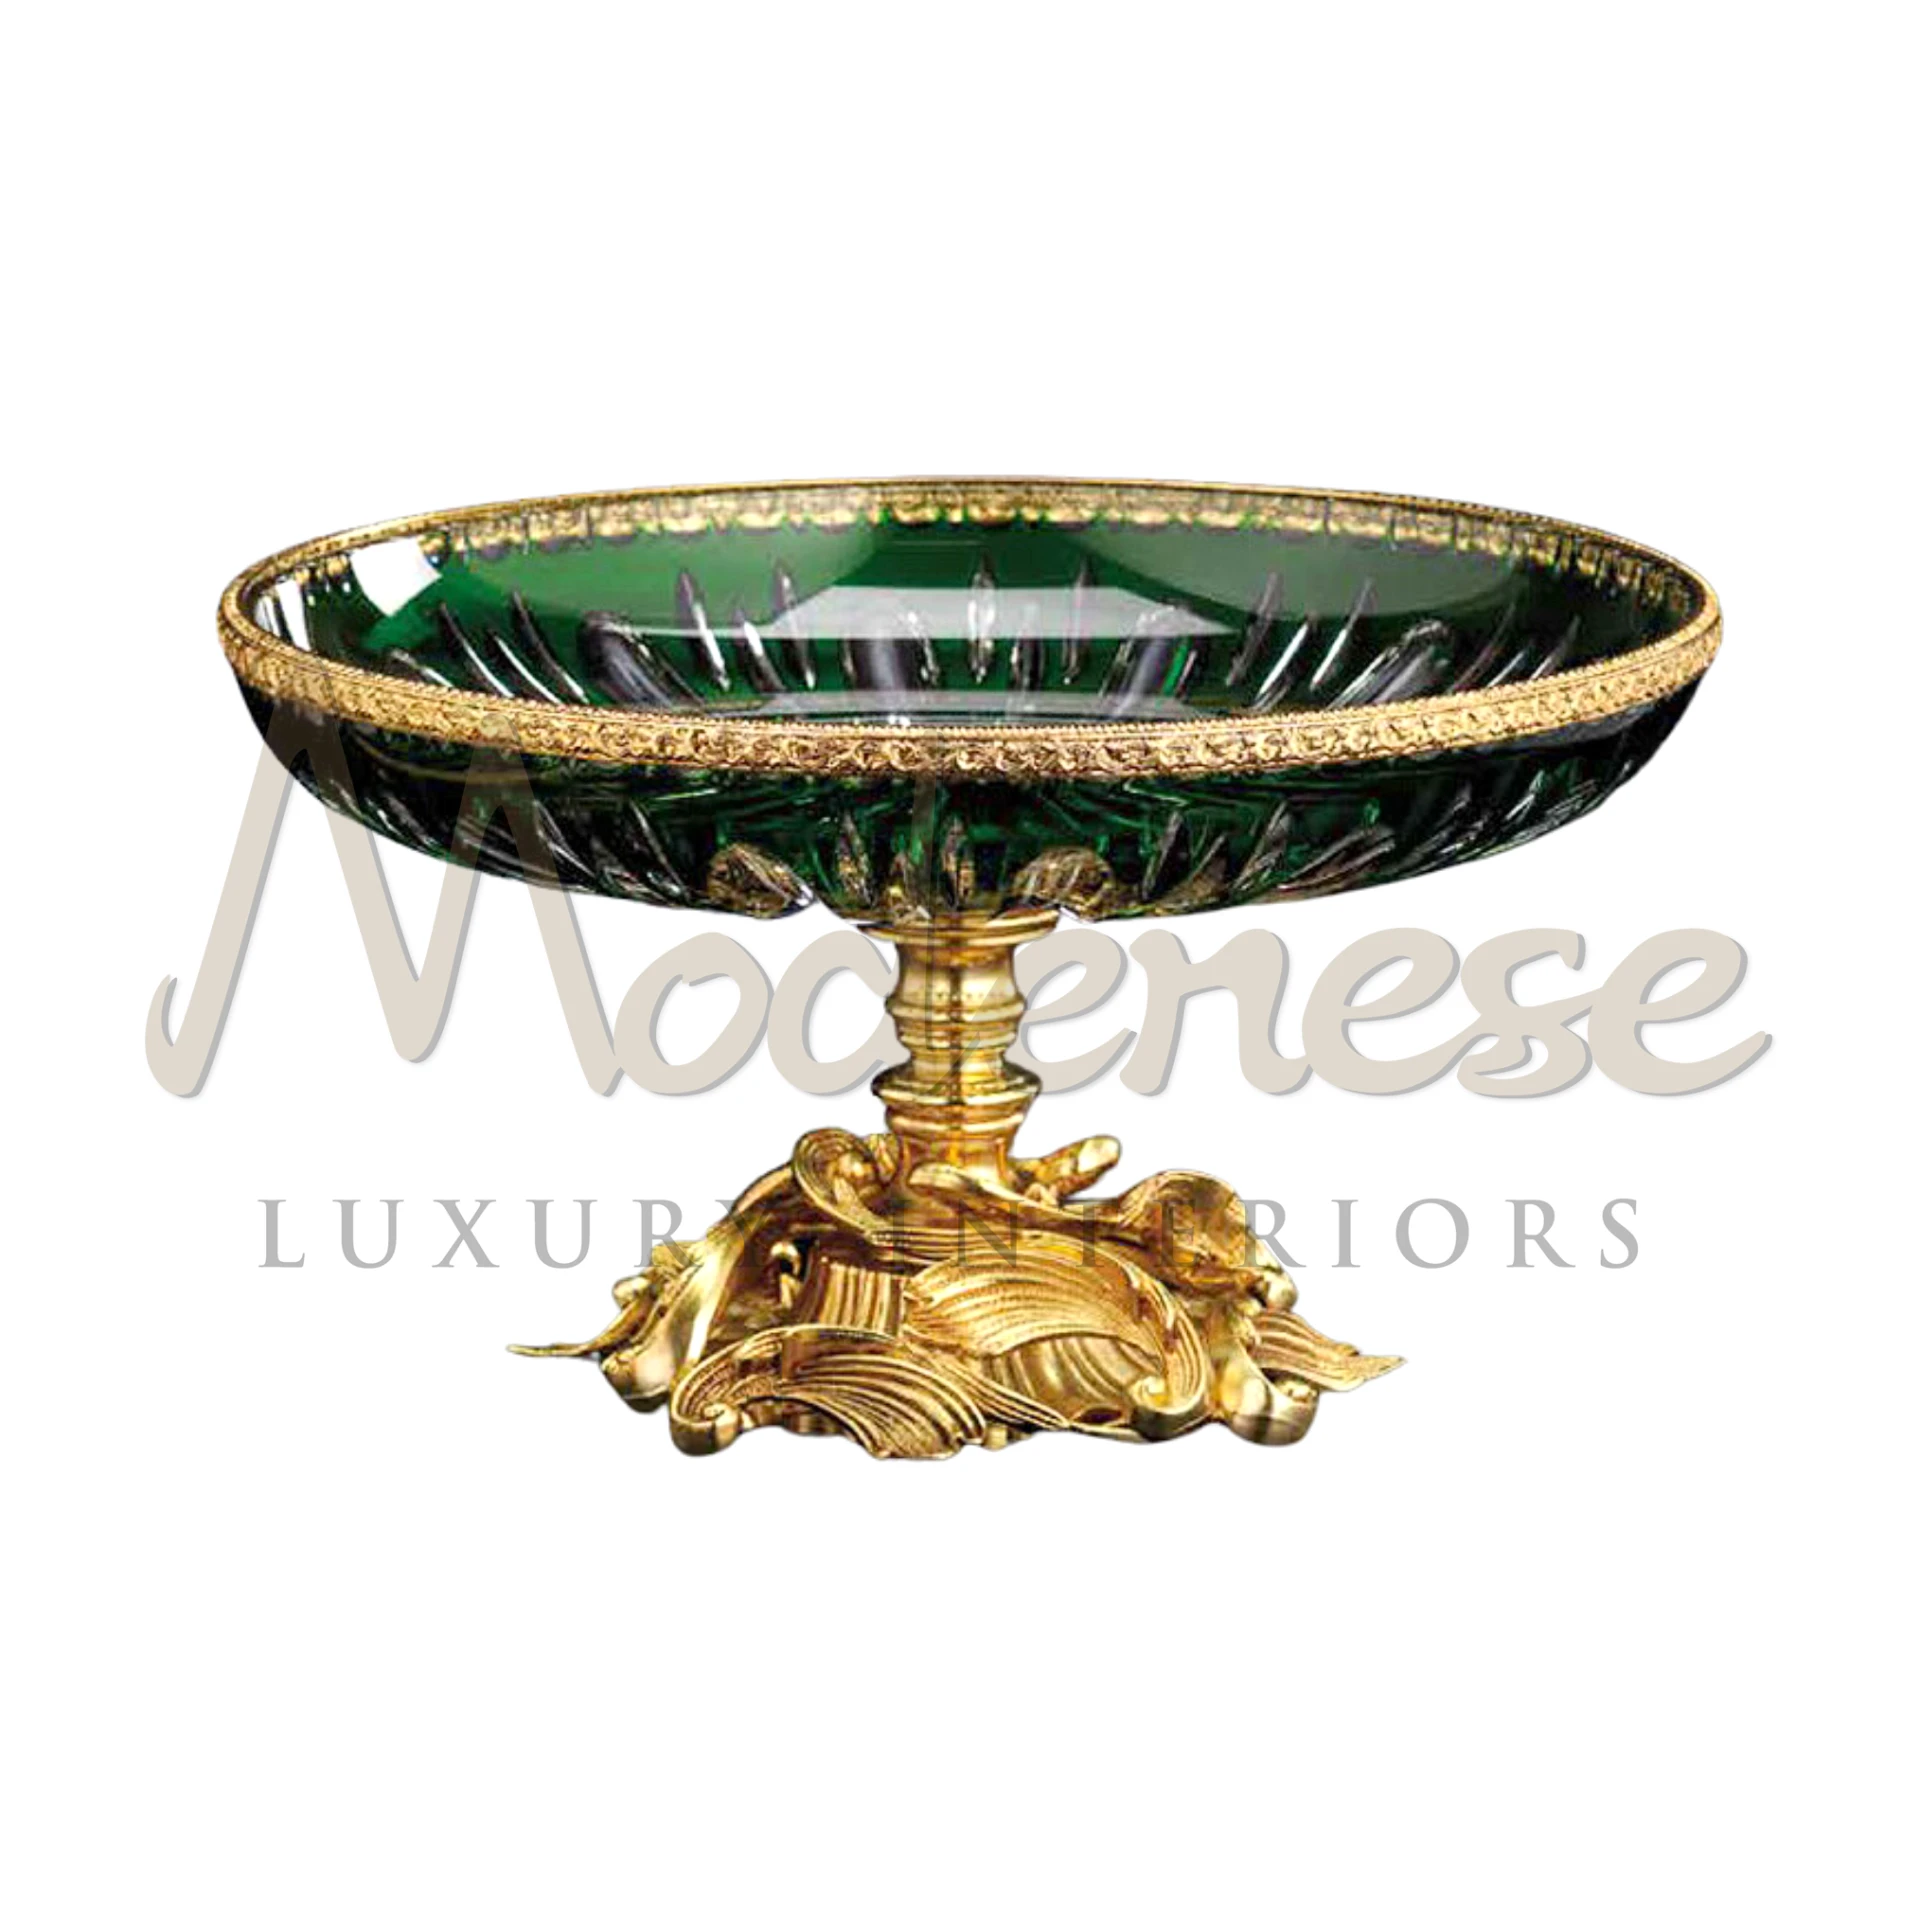 Elegant Traditional Pedestal Green Glass Bowl, featuring a classic style with high-quality craftsmanship.